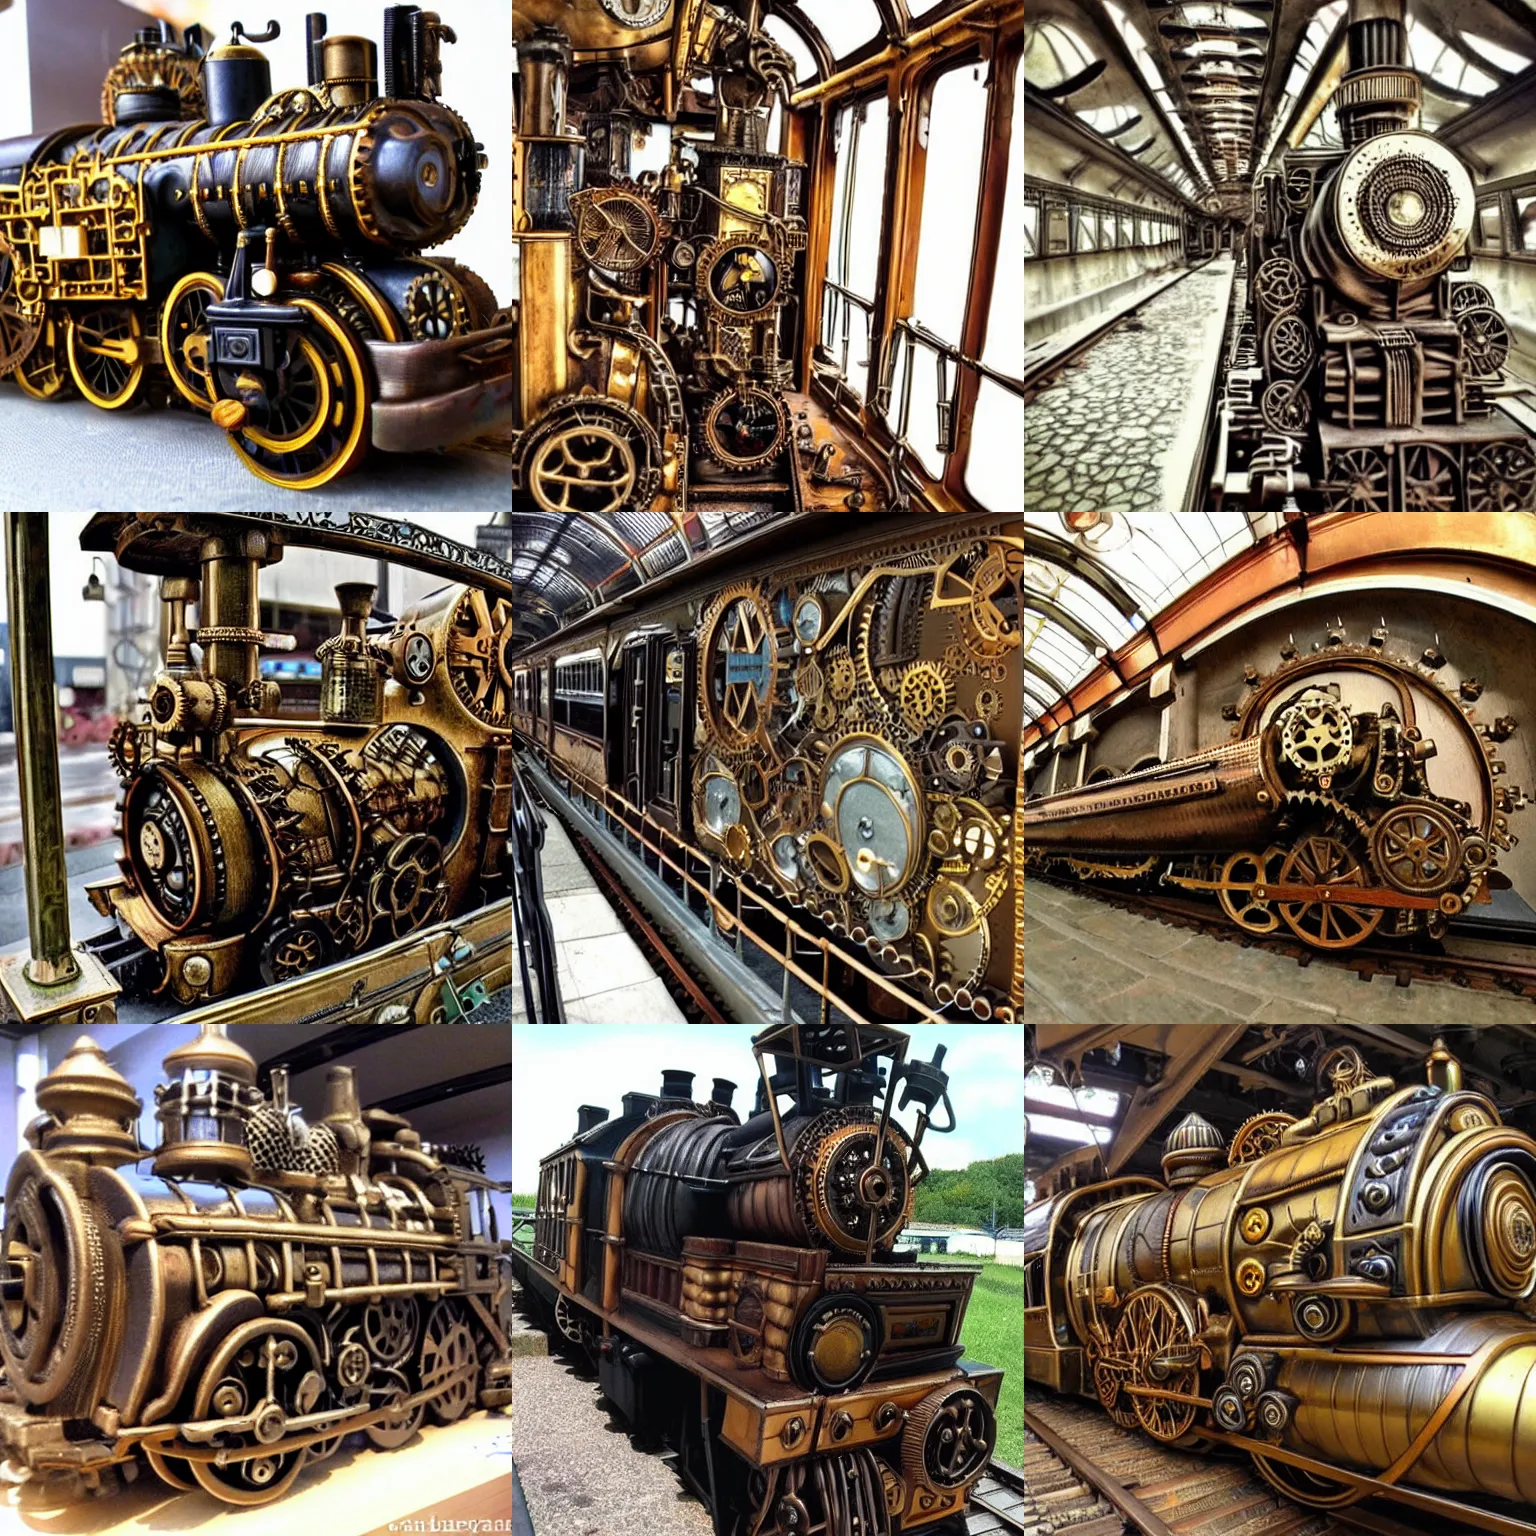 Prompt: this steampunk train is so intricate, what are these gears even for